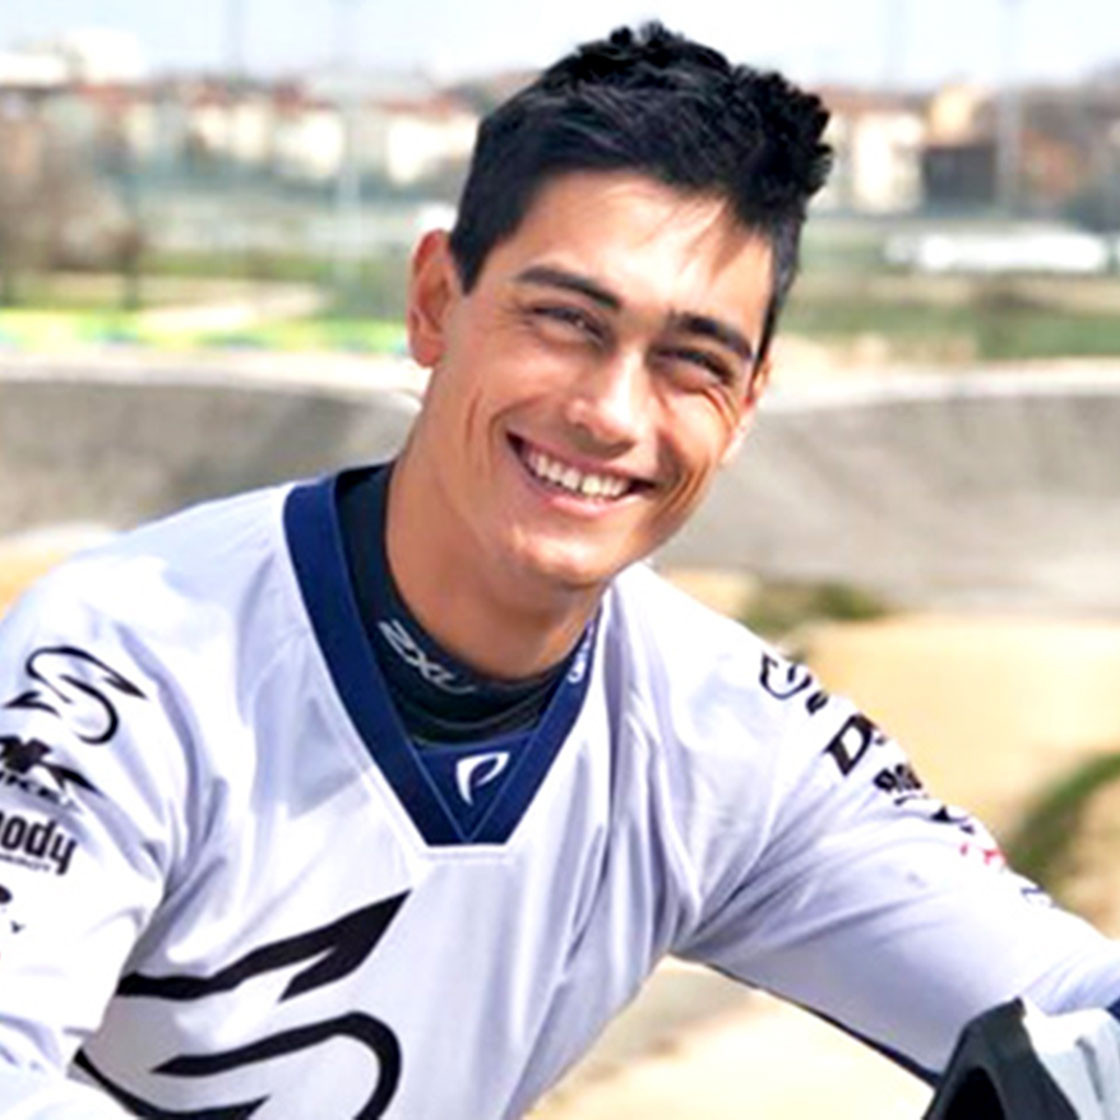 BMX rider has Olympic dream dashed, but eyes return to the track